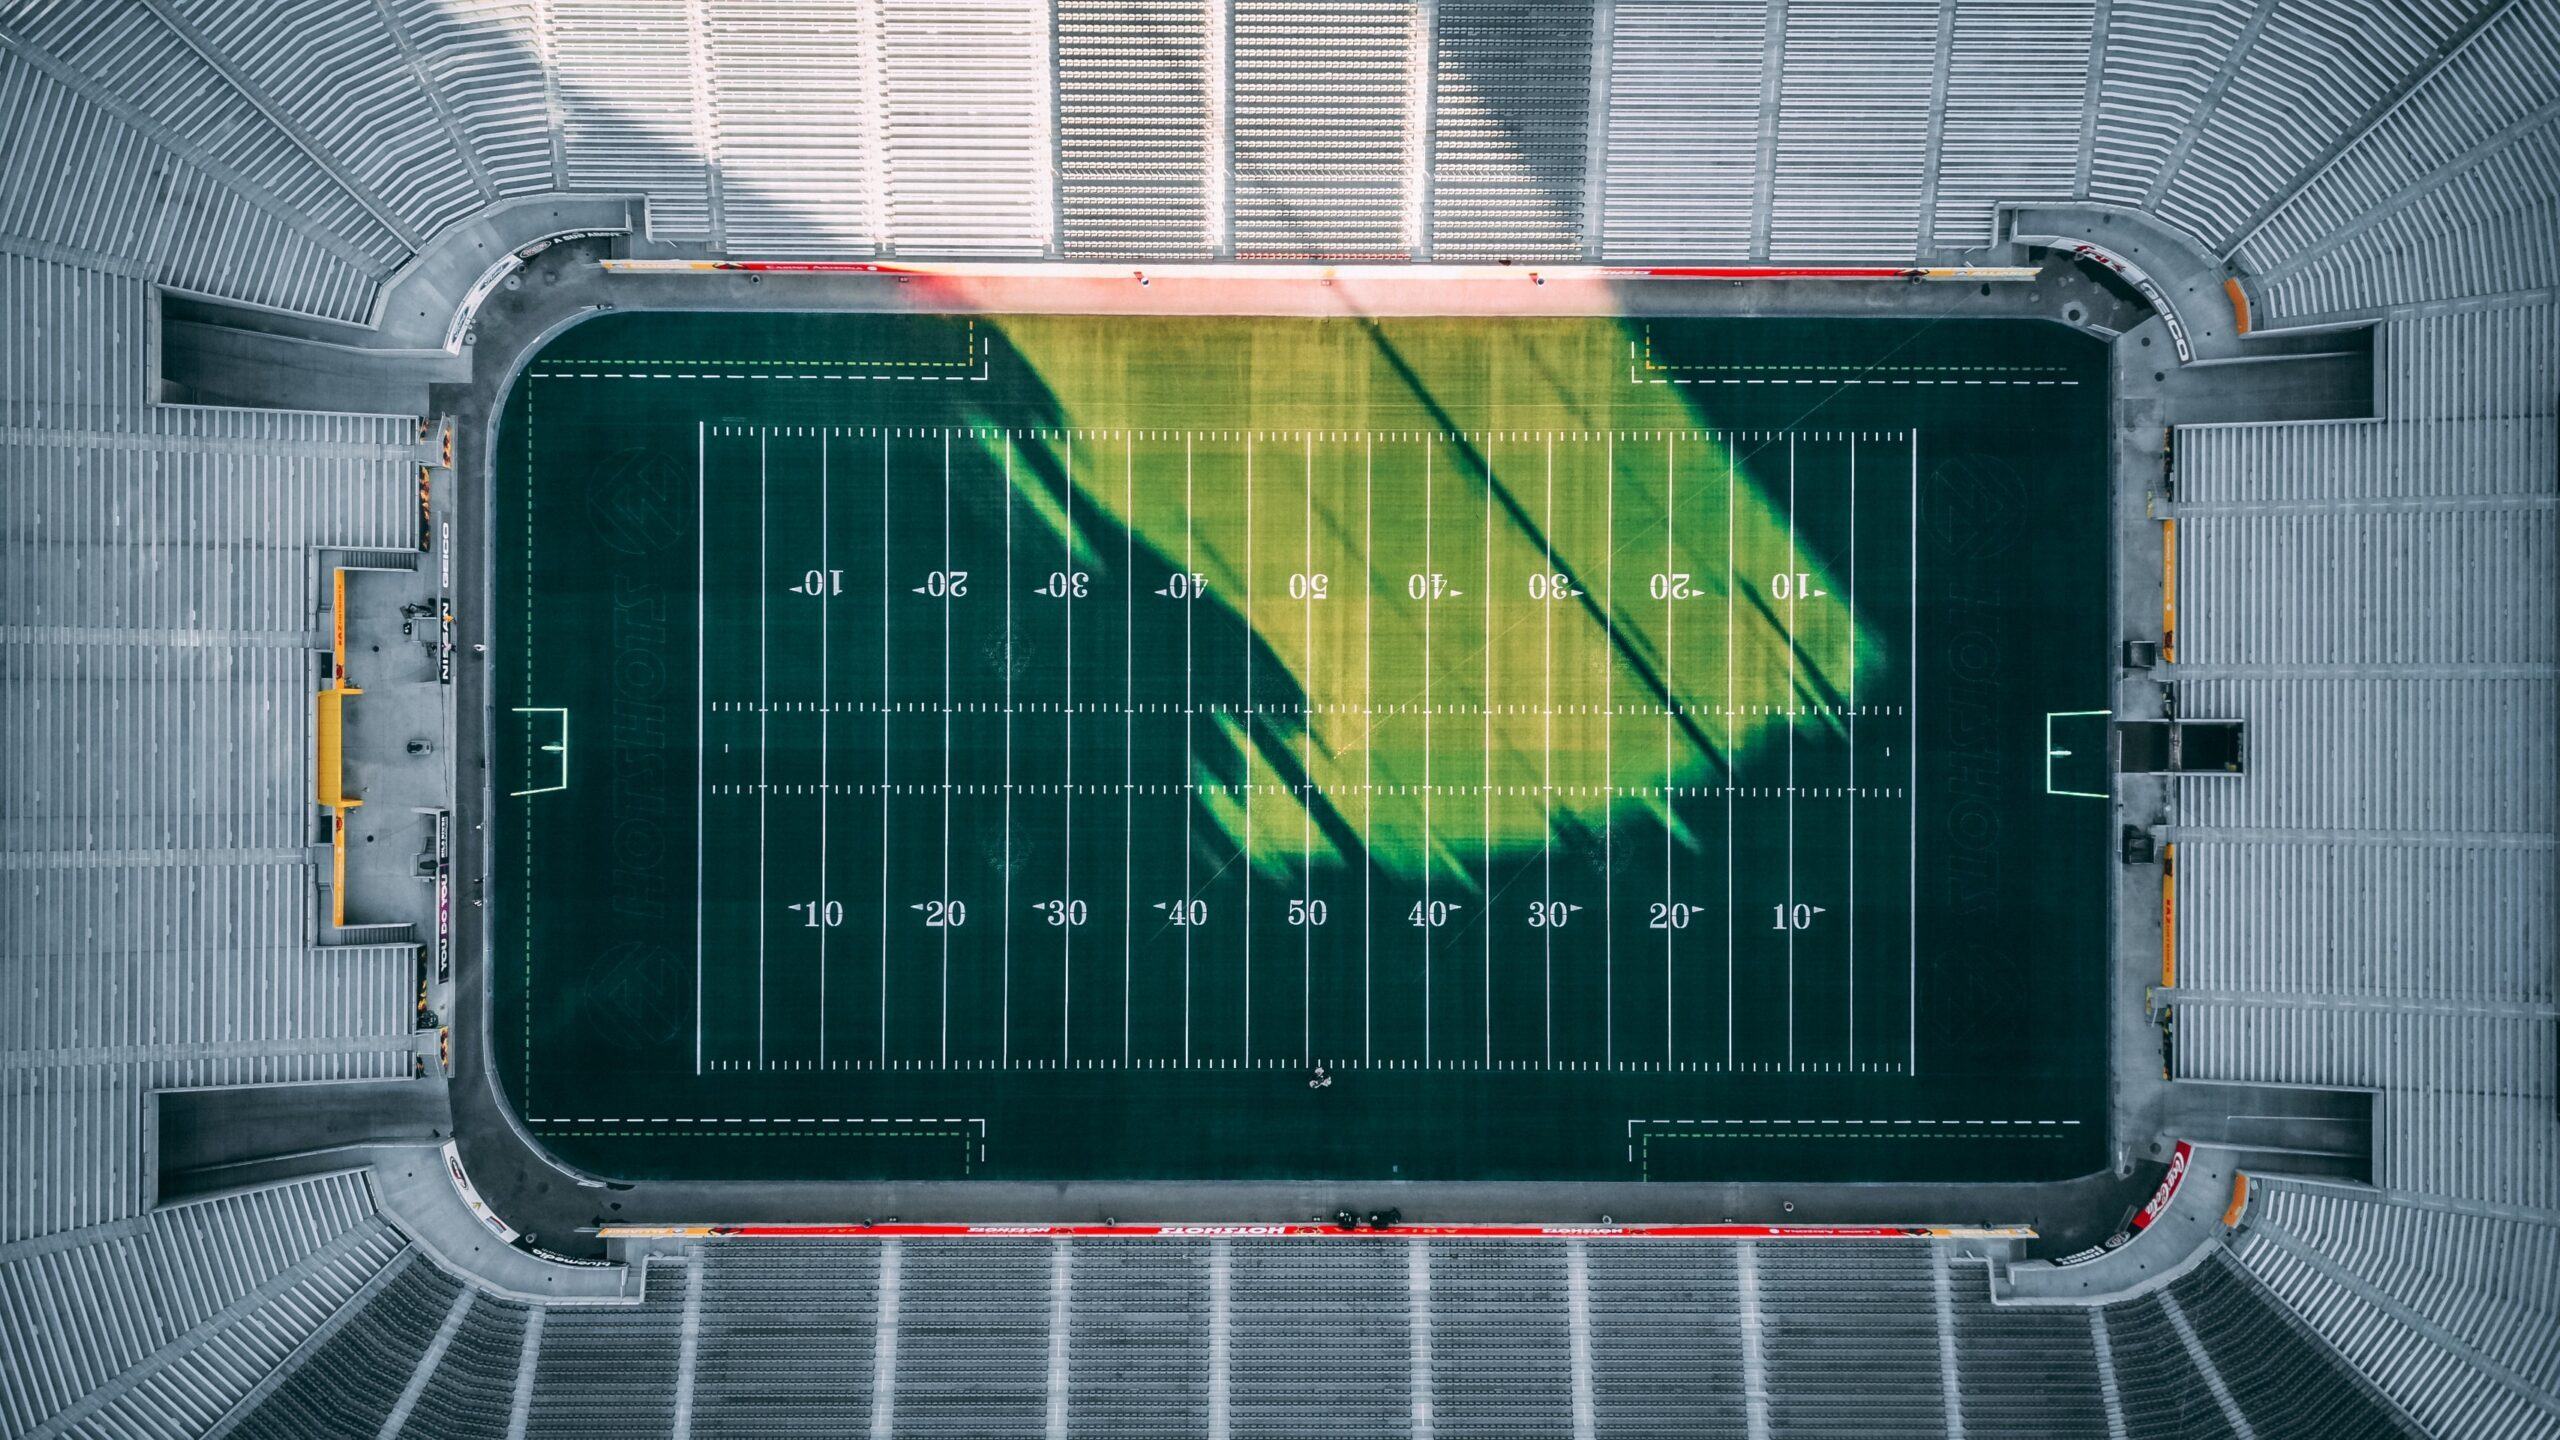 The numbers and lines on the football field have meanings scaled